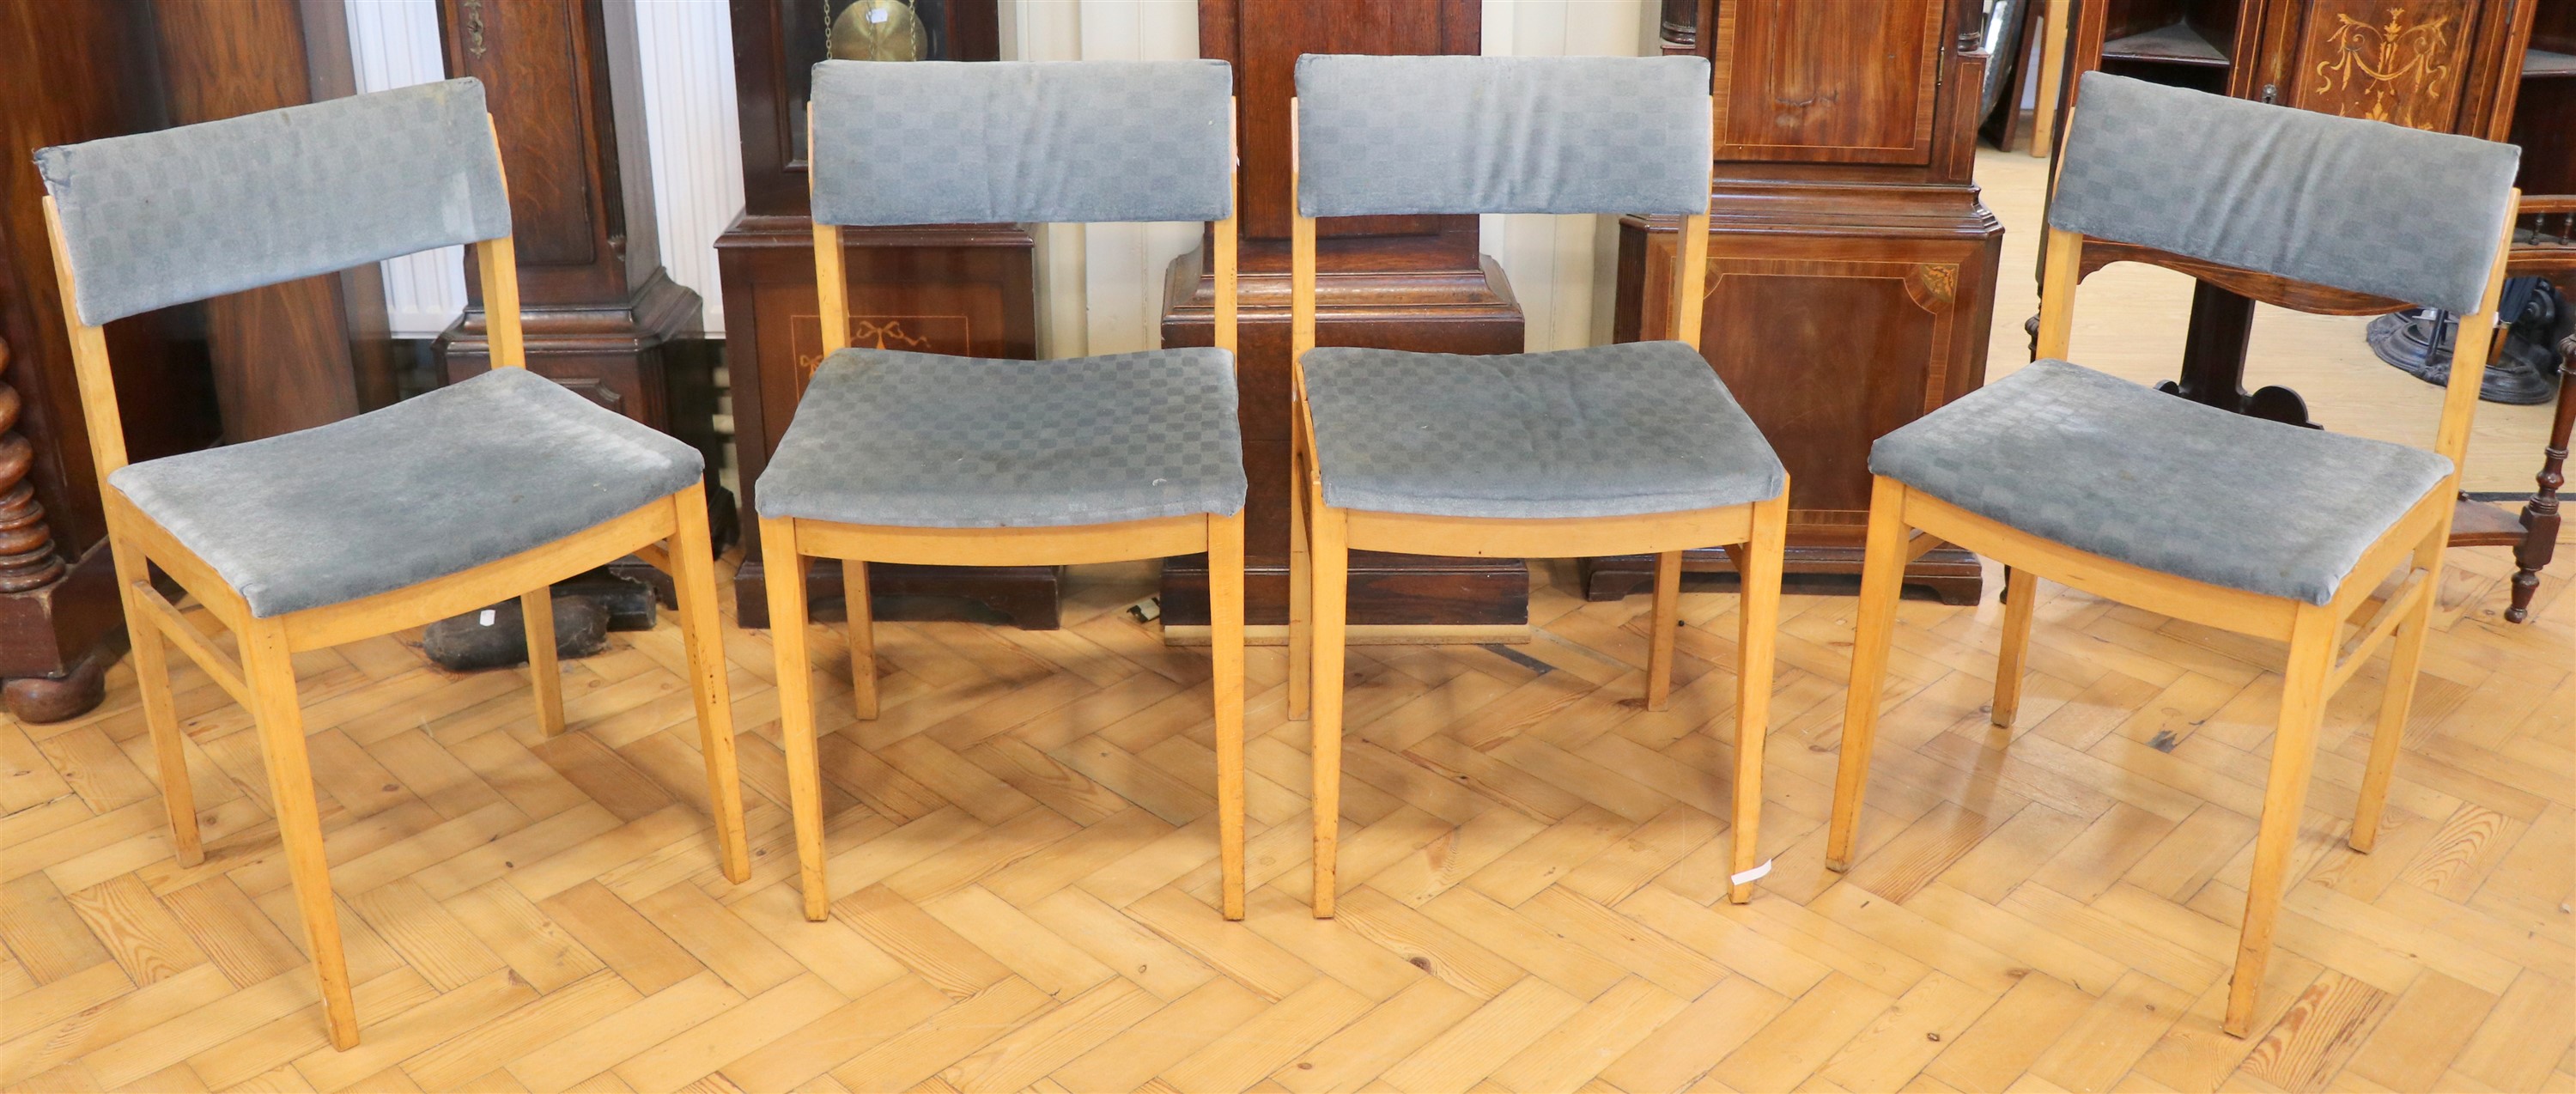 A set of four teak Beautility dining chairs, 1950s / 1960s, [sold strictly for re-upholstery]